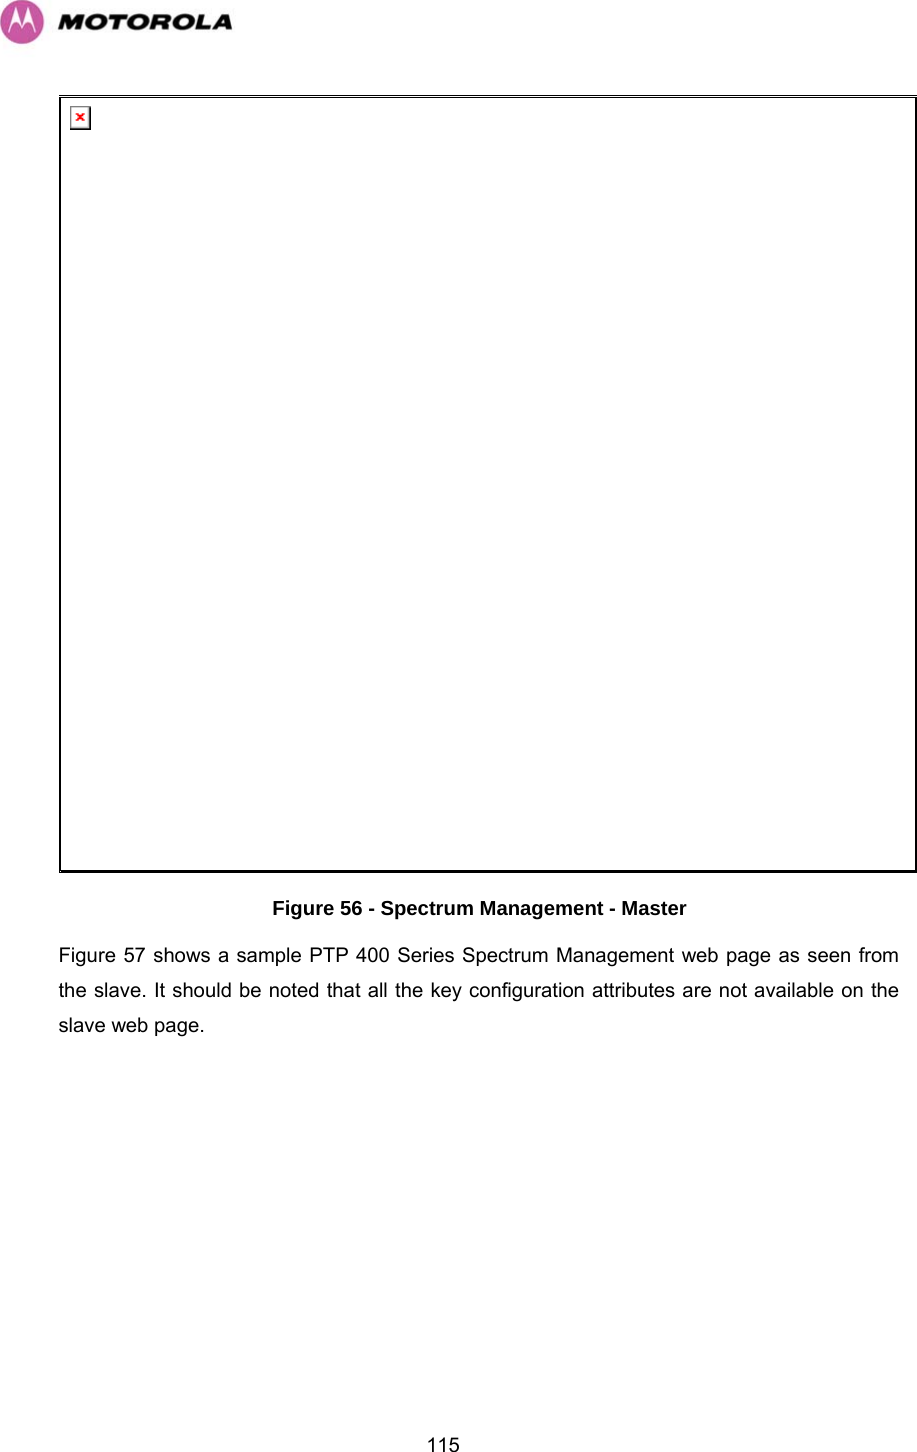   115 Figure 56 - Spectrum Management - Master Figure 57 shows a sample PTP 400 Series Spectrum Management web page as seen from the slave. It should be noted that all the key configuration attributes are not available on the slave web page. 